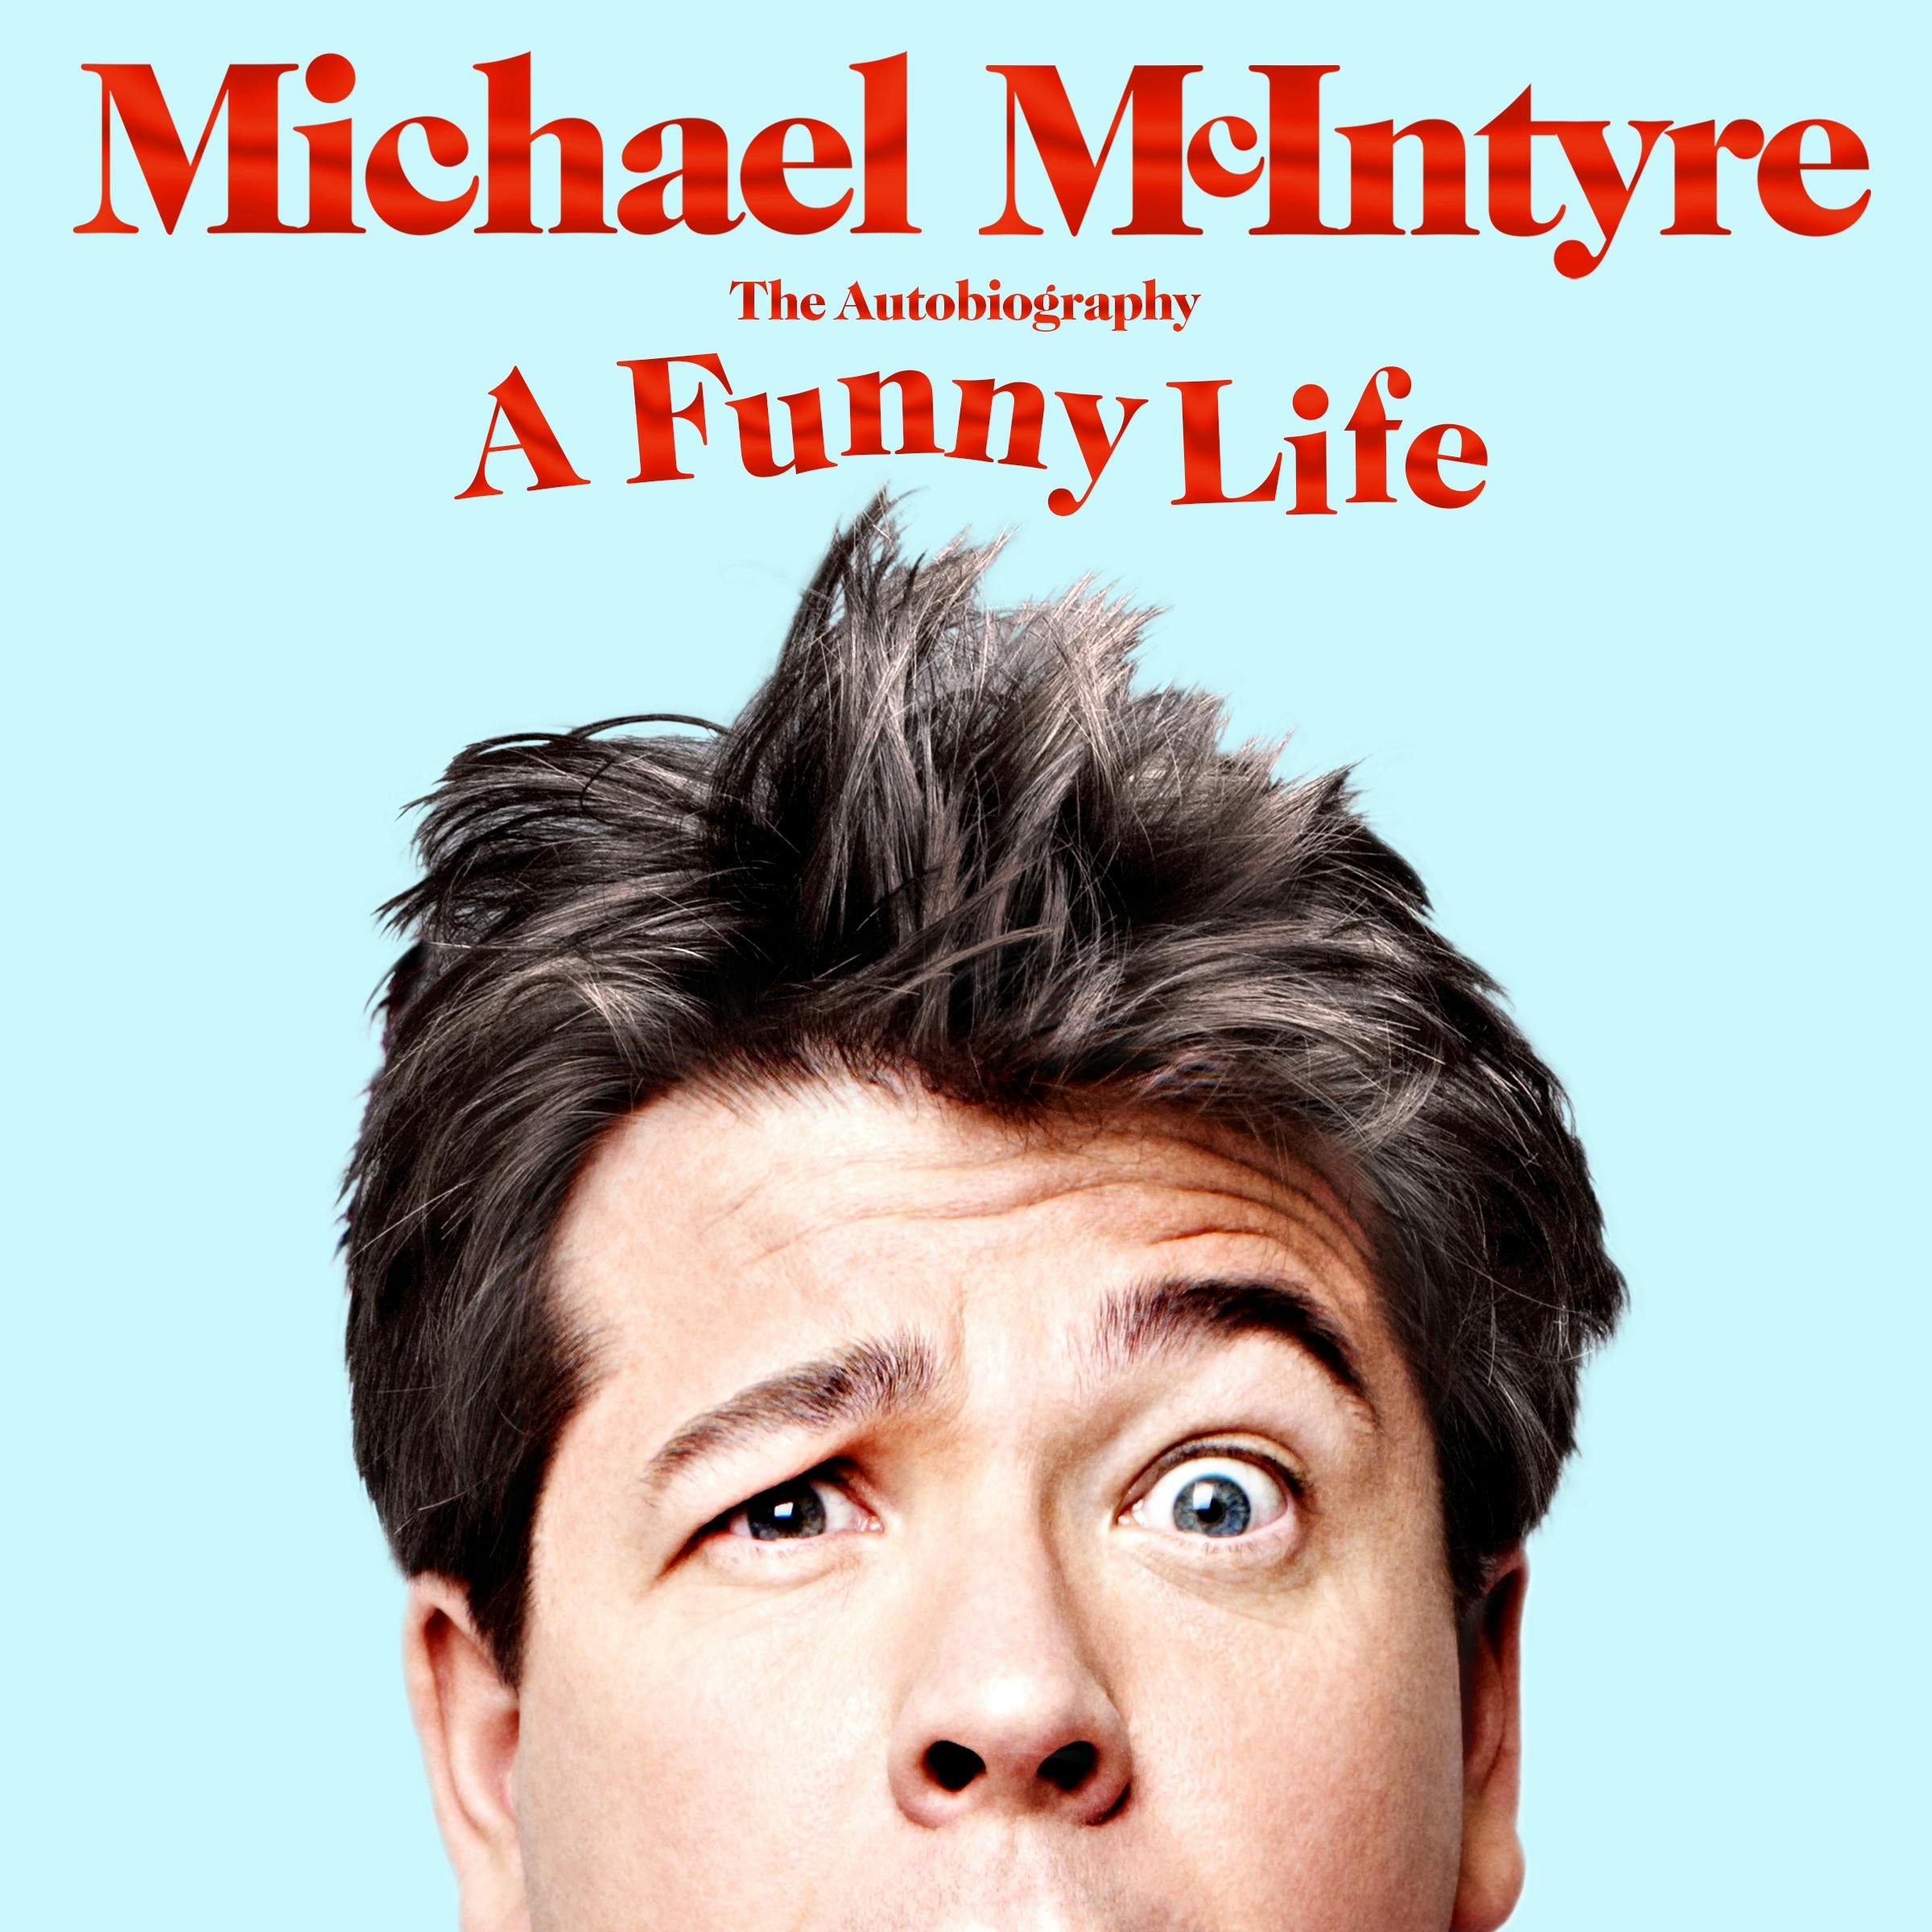 A Funny Life - Michael McIntyre